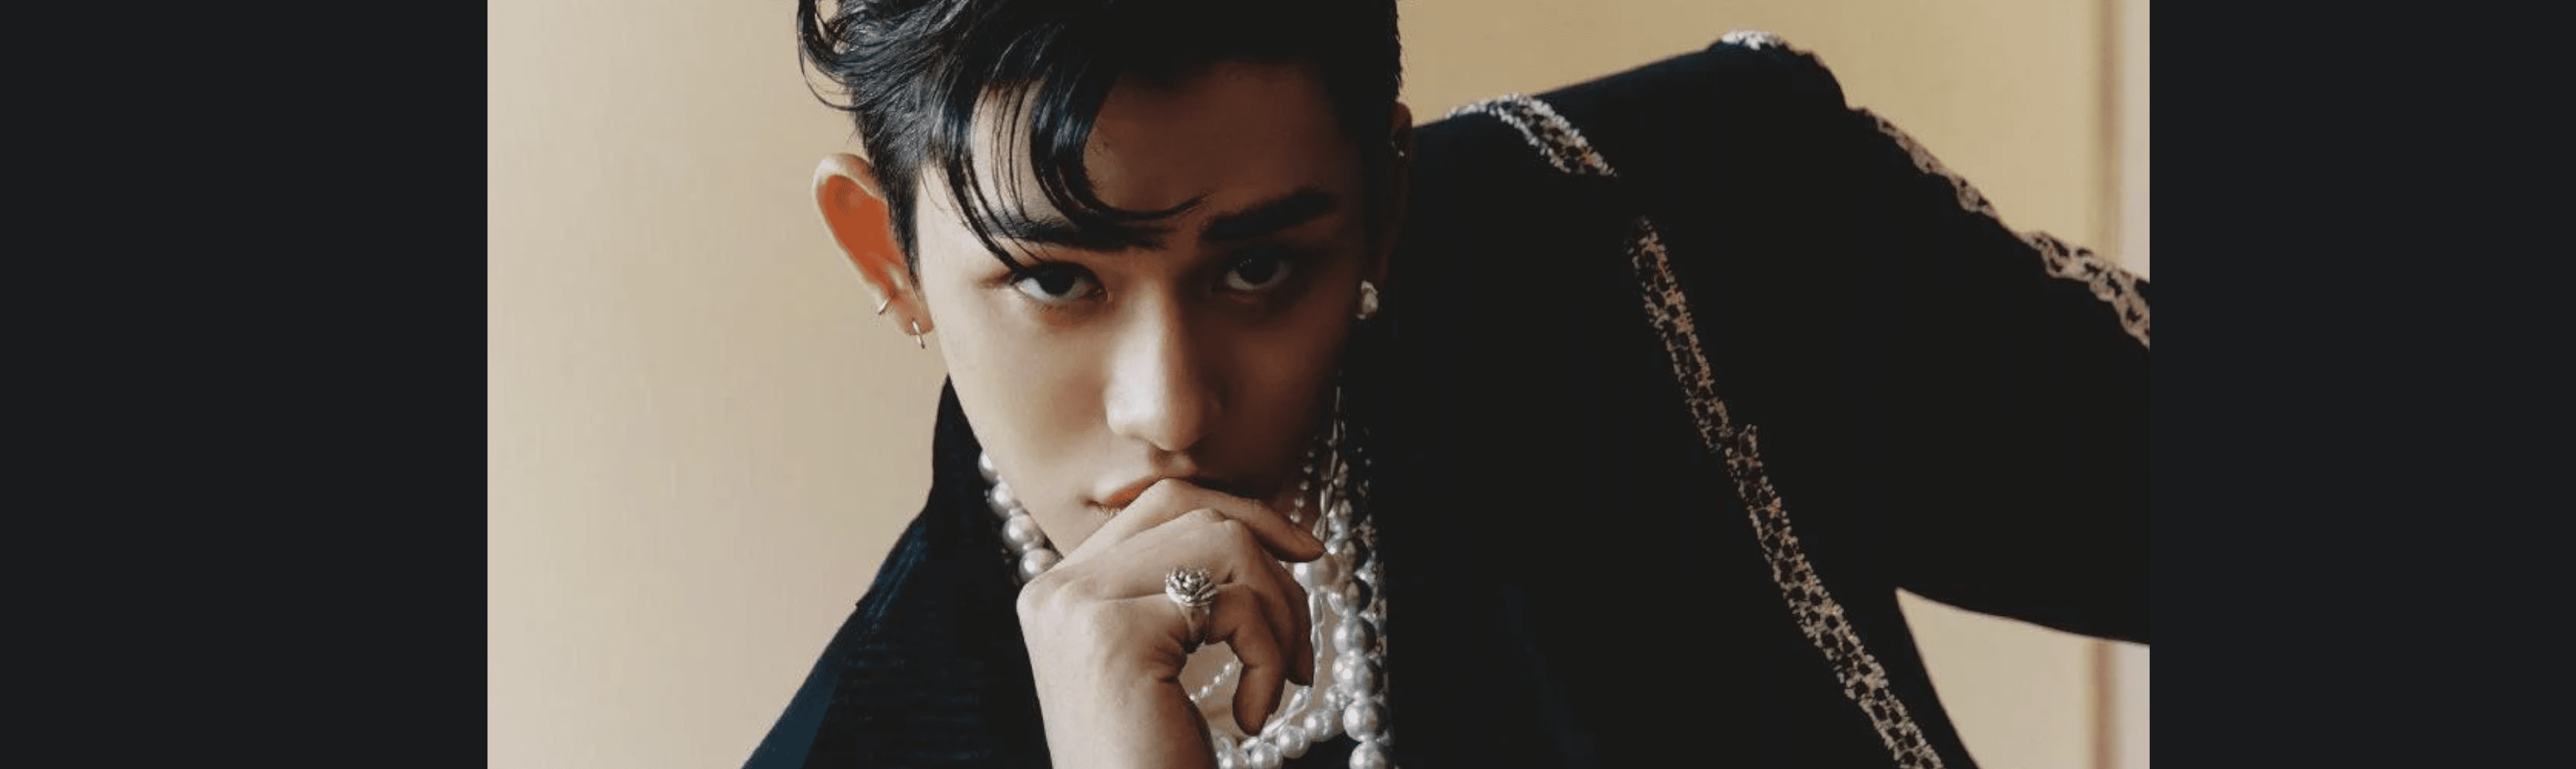 Lucas to leave K-pop boy bands NCT, WayV